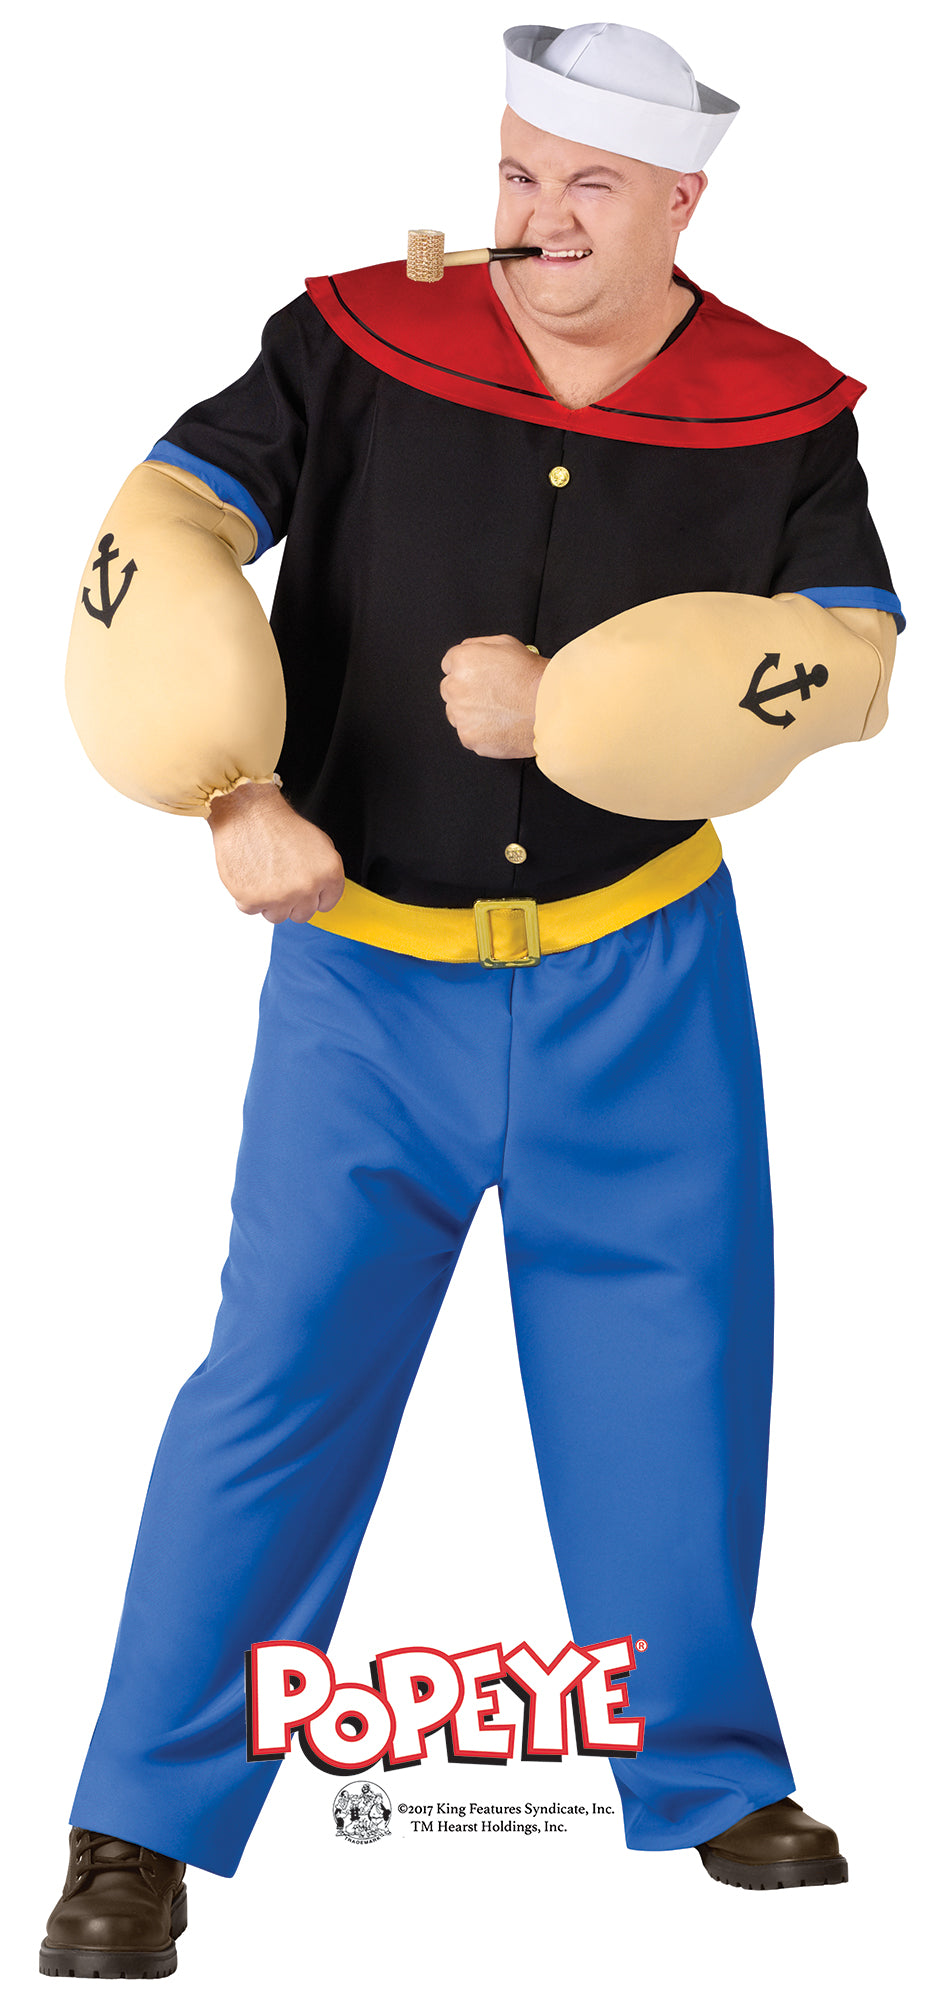 Deluxe Popeye Adult Costume - Plus Size